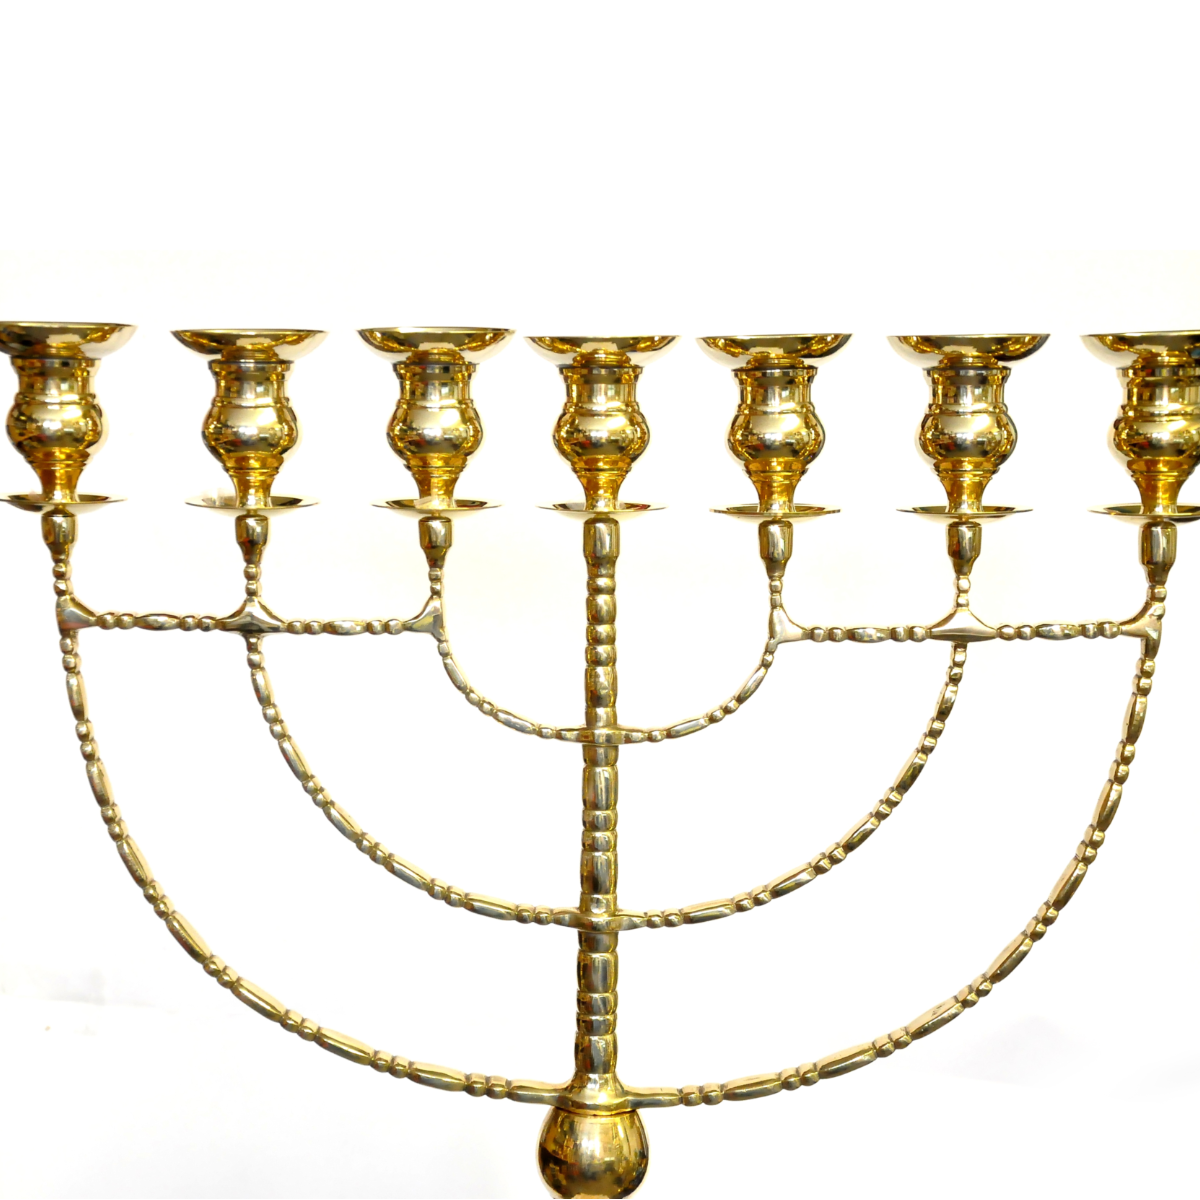 Huge Oil Menorah In Gold Plated "The Temple" candle holder 51.2″ / 130 cm